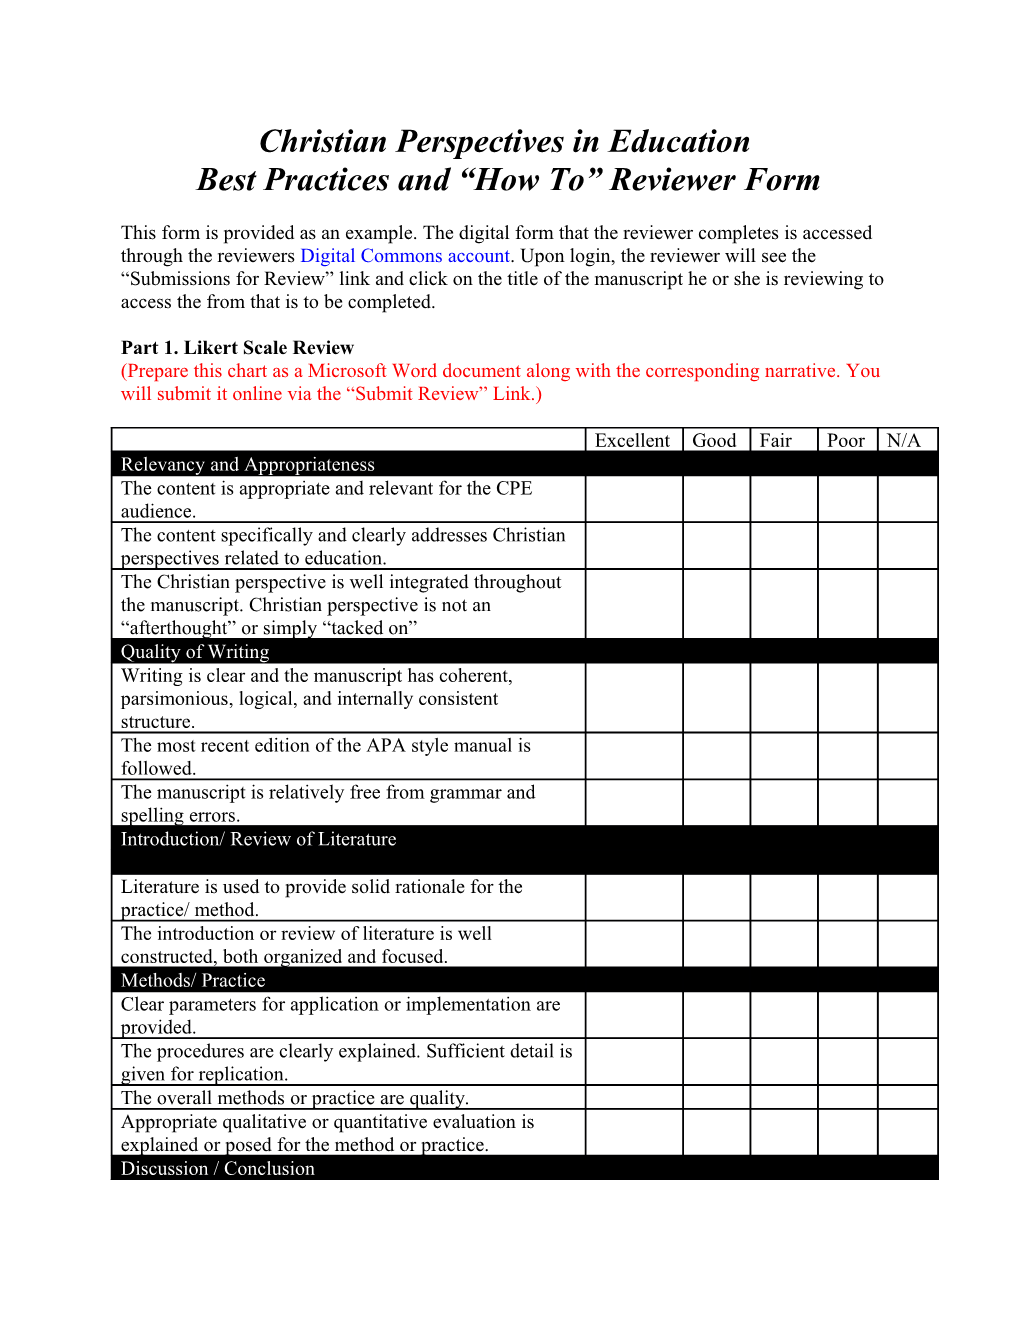 Best Practices and How to Reviewer Form